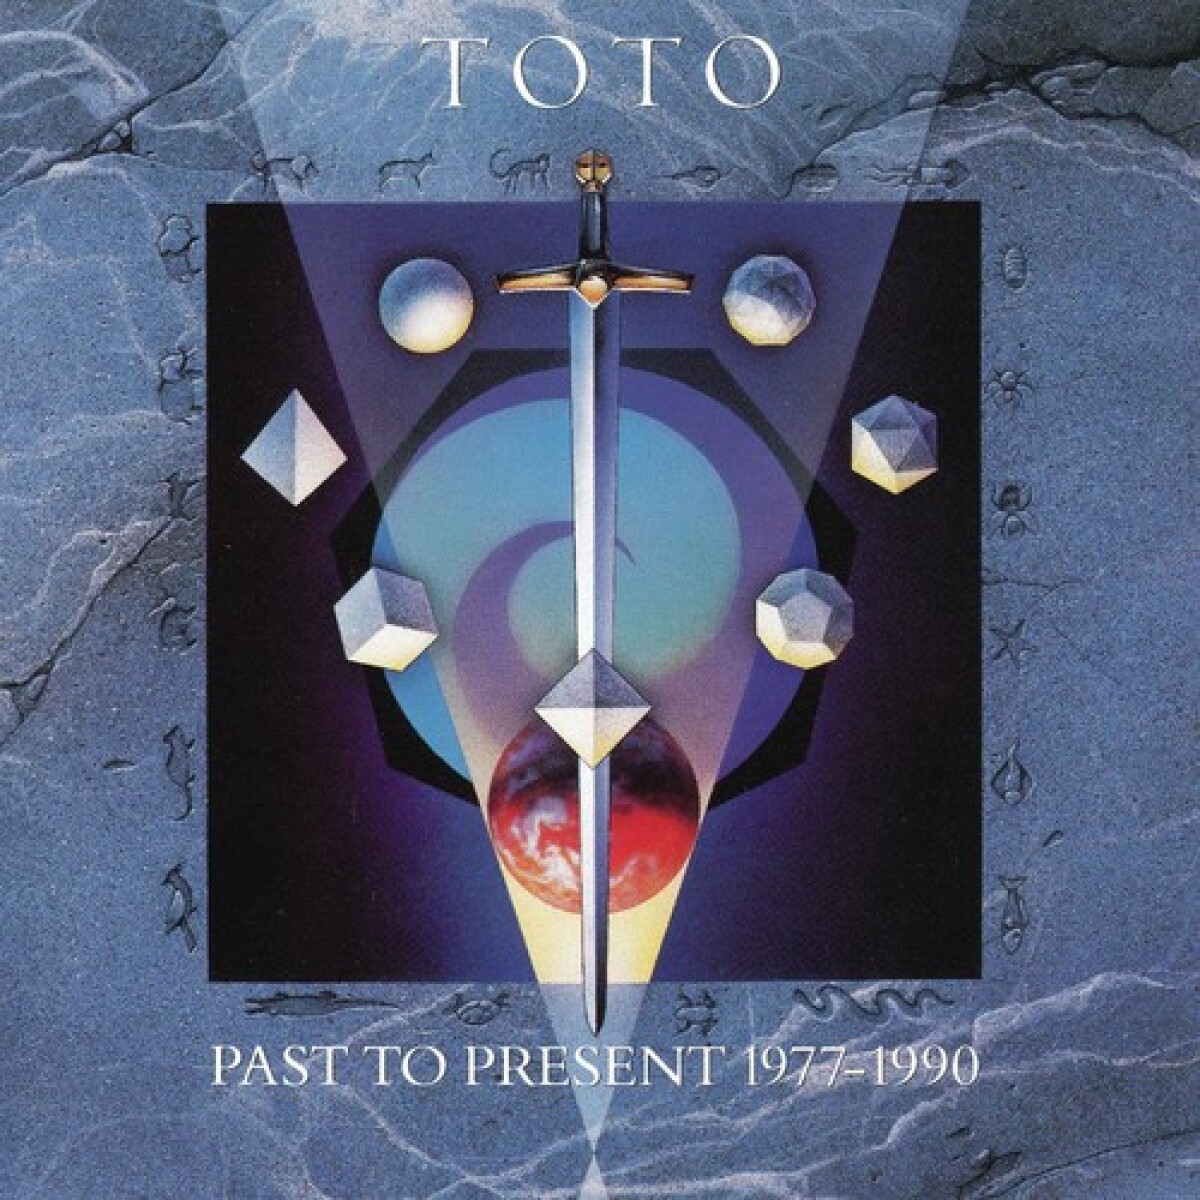 (c) Toto - Past To Present 1977 - 1990 - Cd 